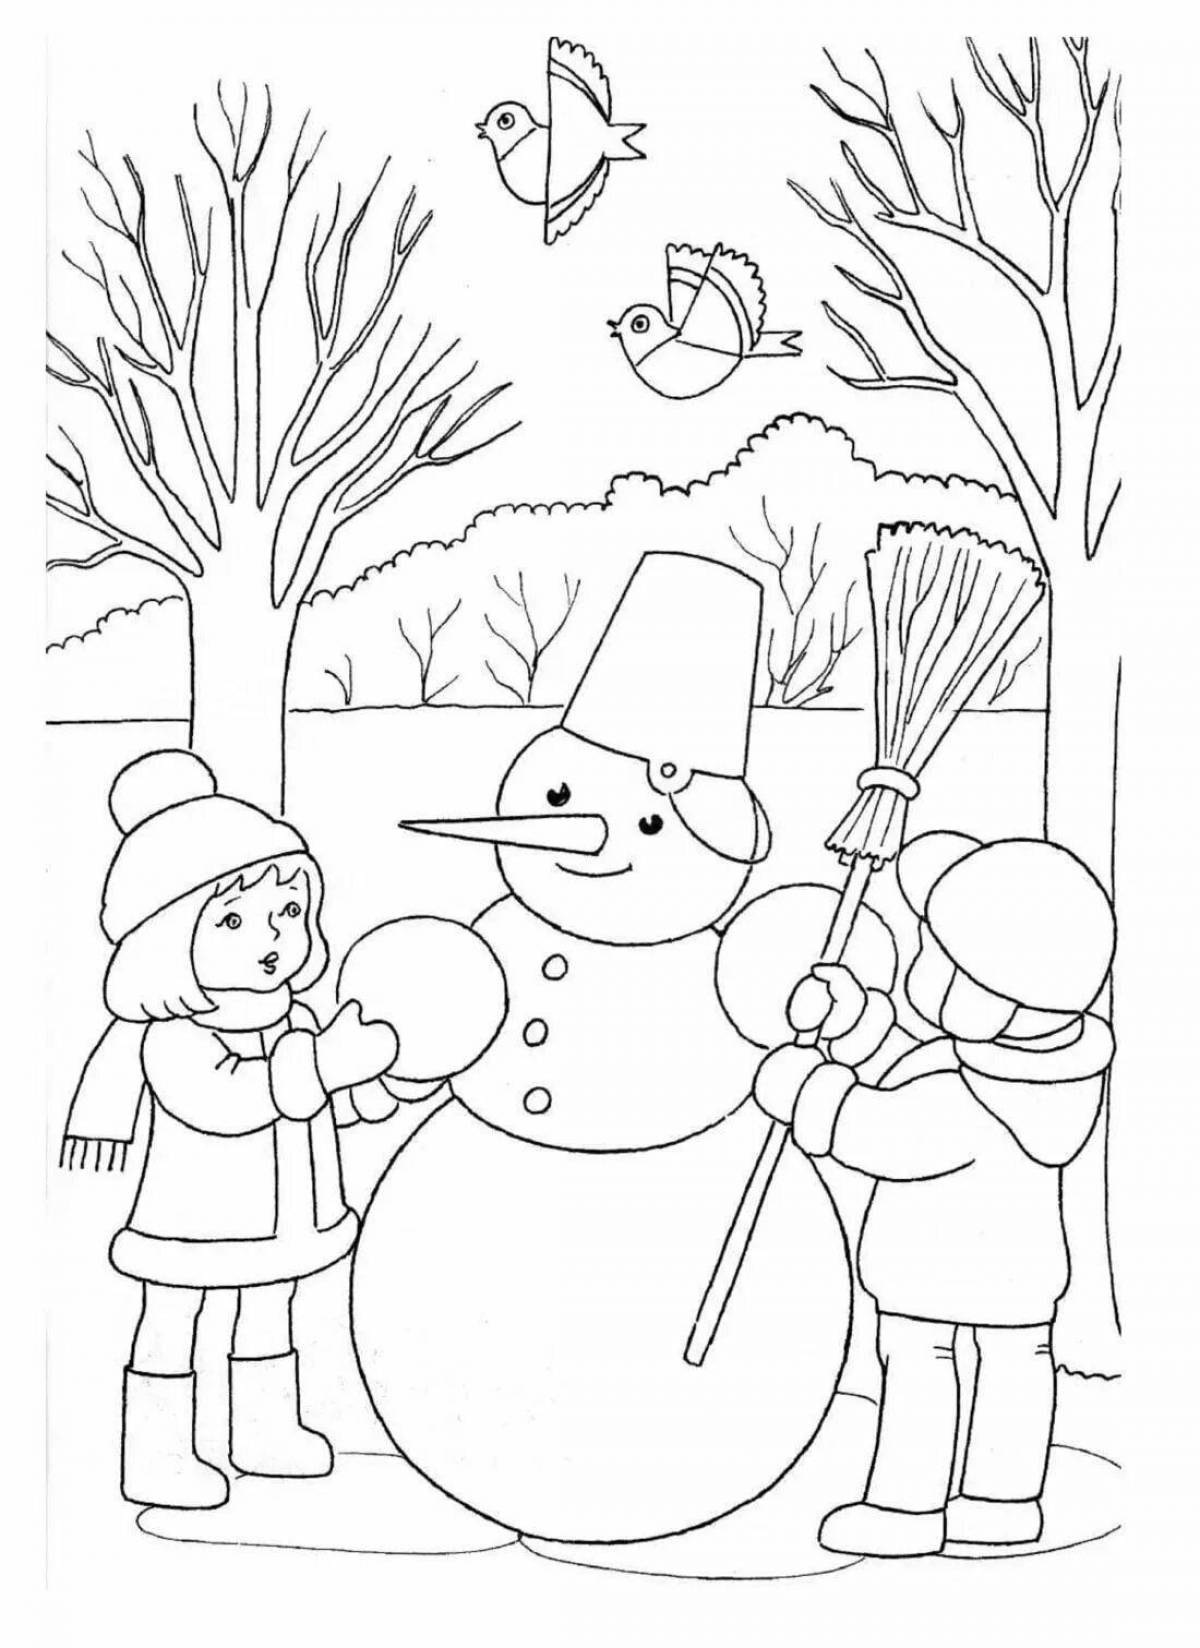 Whimsical winter coloring book for kids